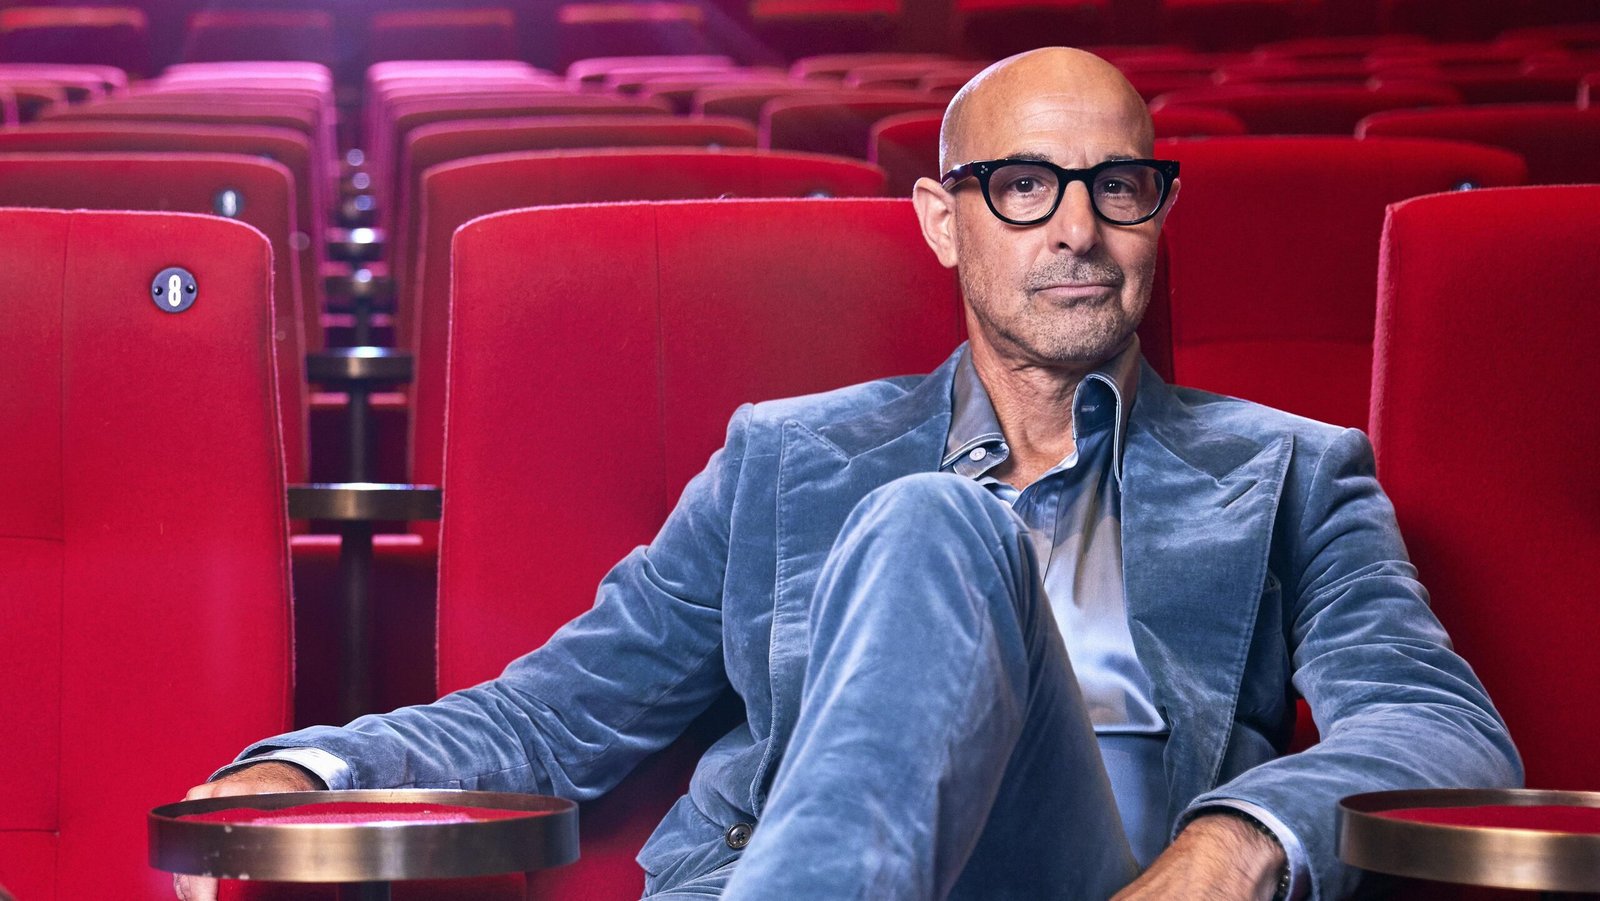 Stanley Tucci Speaks On His Battle With Cancer: “I Had A Feeding Tube For Six Months”